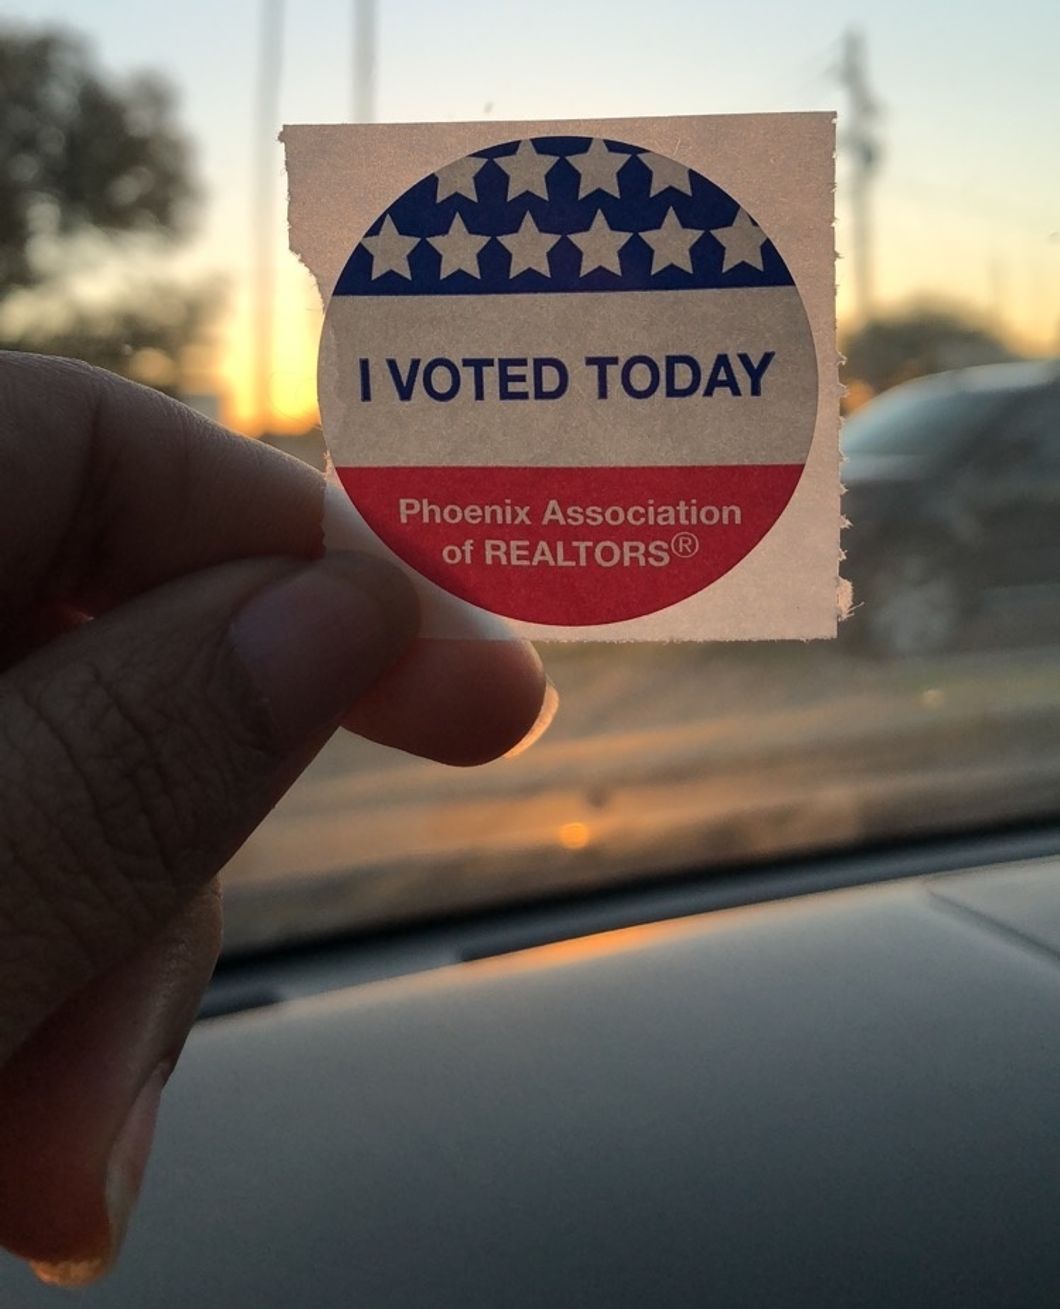 I Choose To Express My Power As A US Citizen And Vote